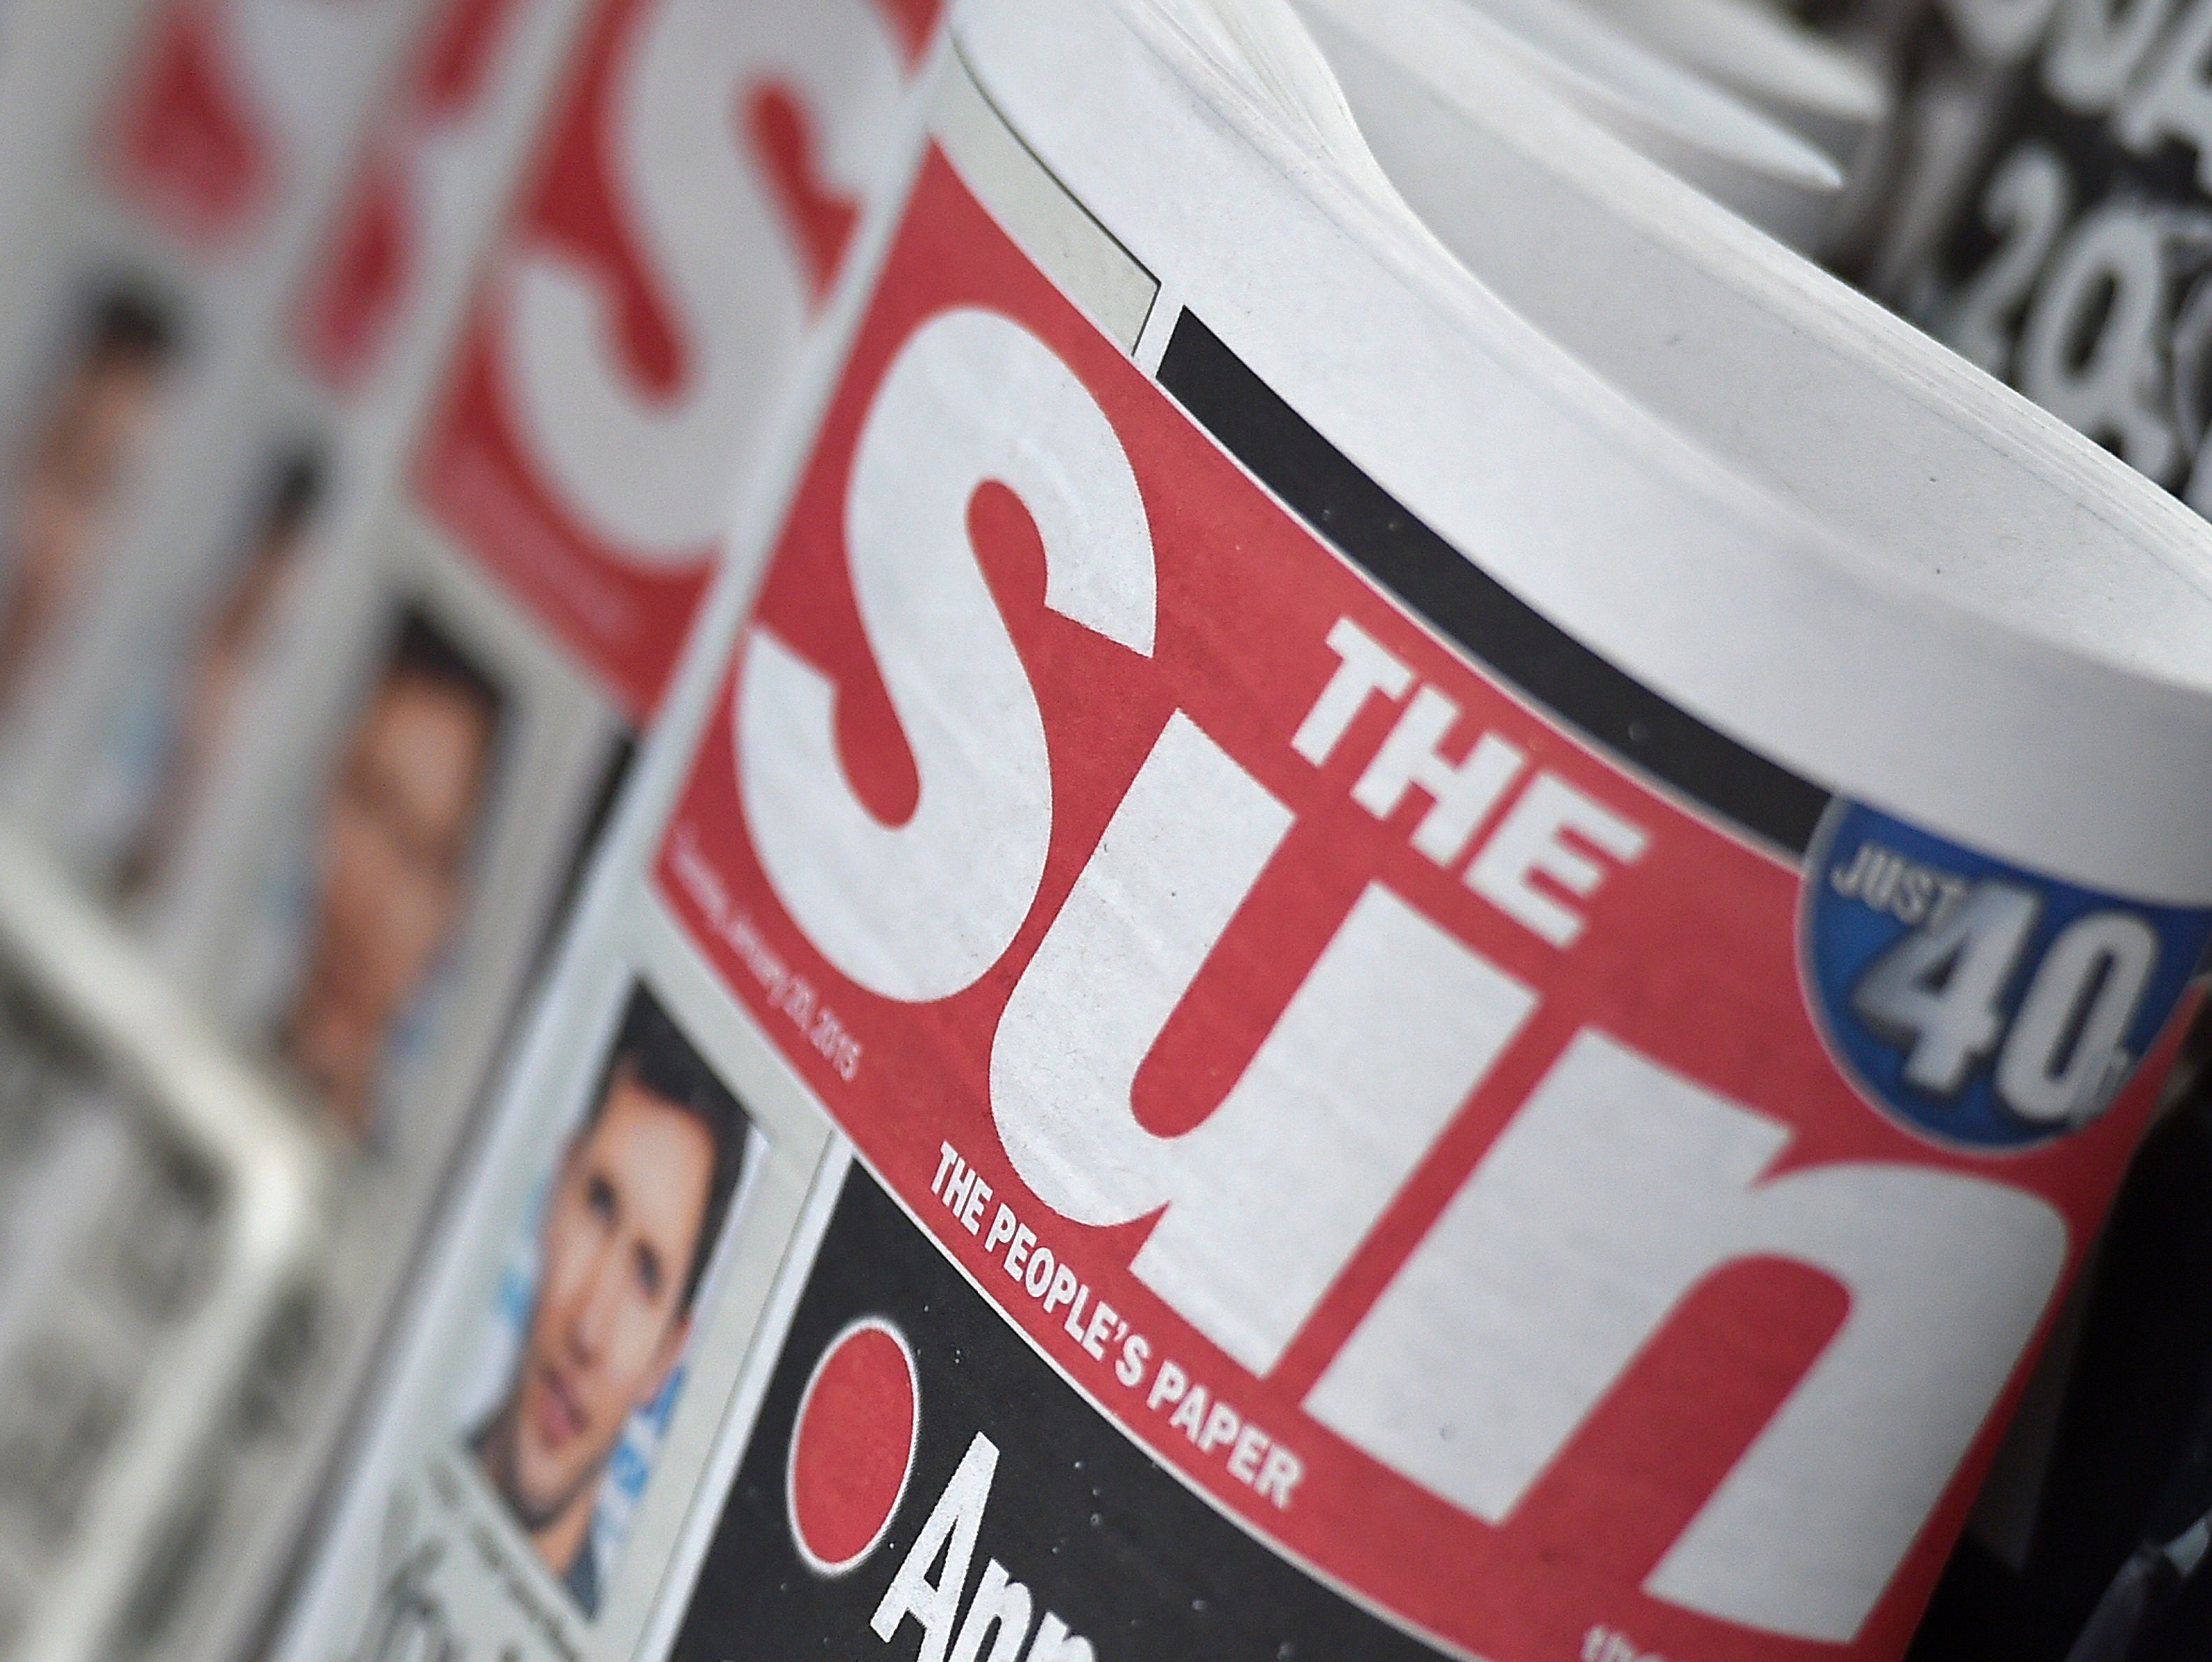 Sun apprenticeship scheme open to budding journalists without degrees